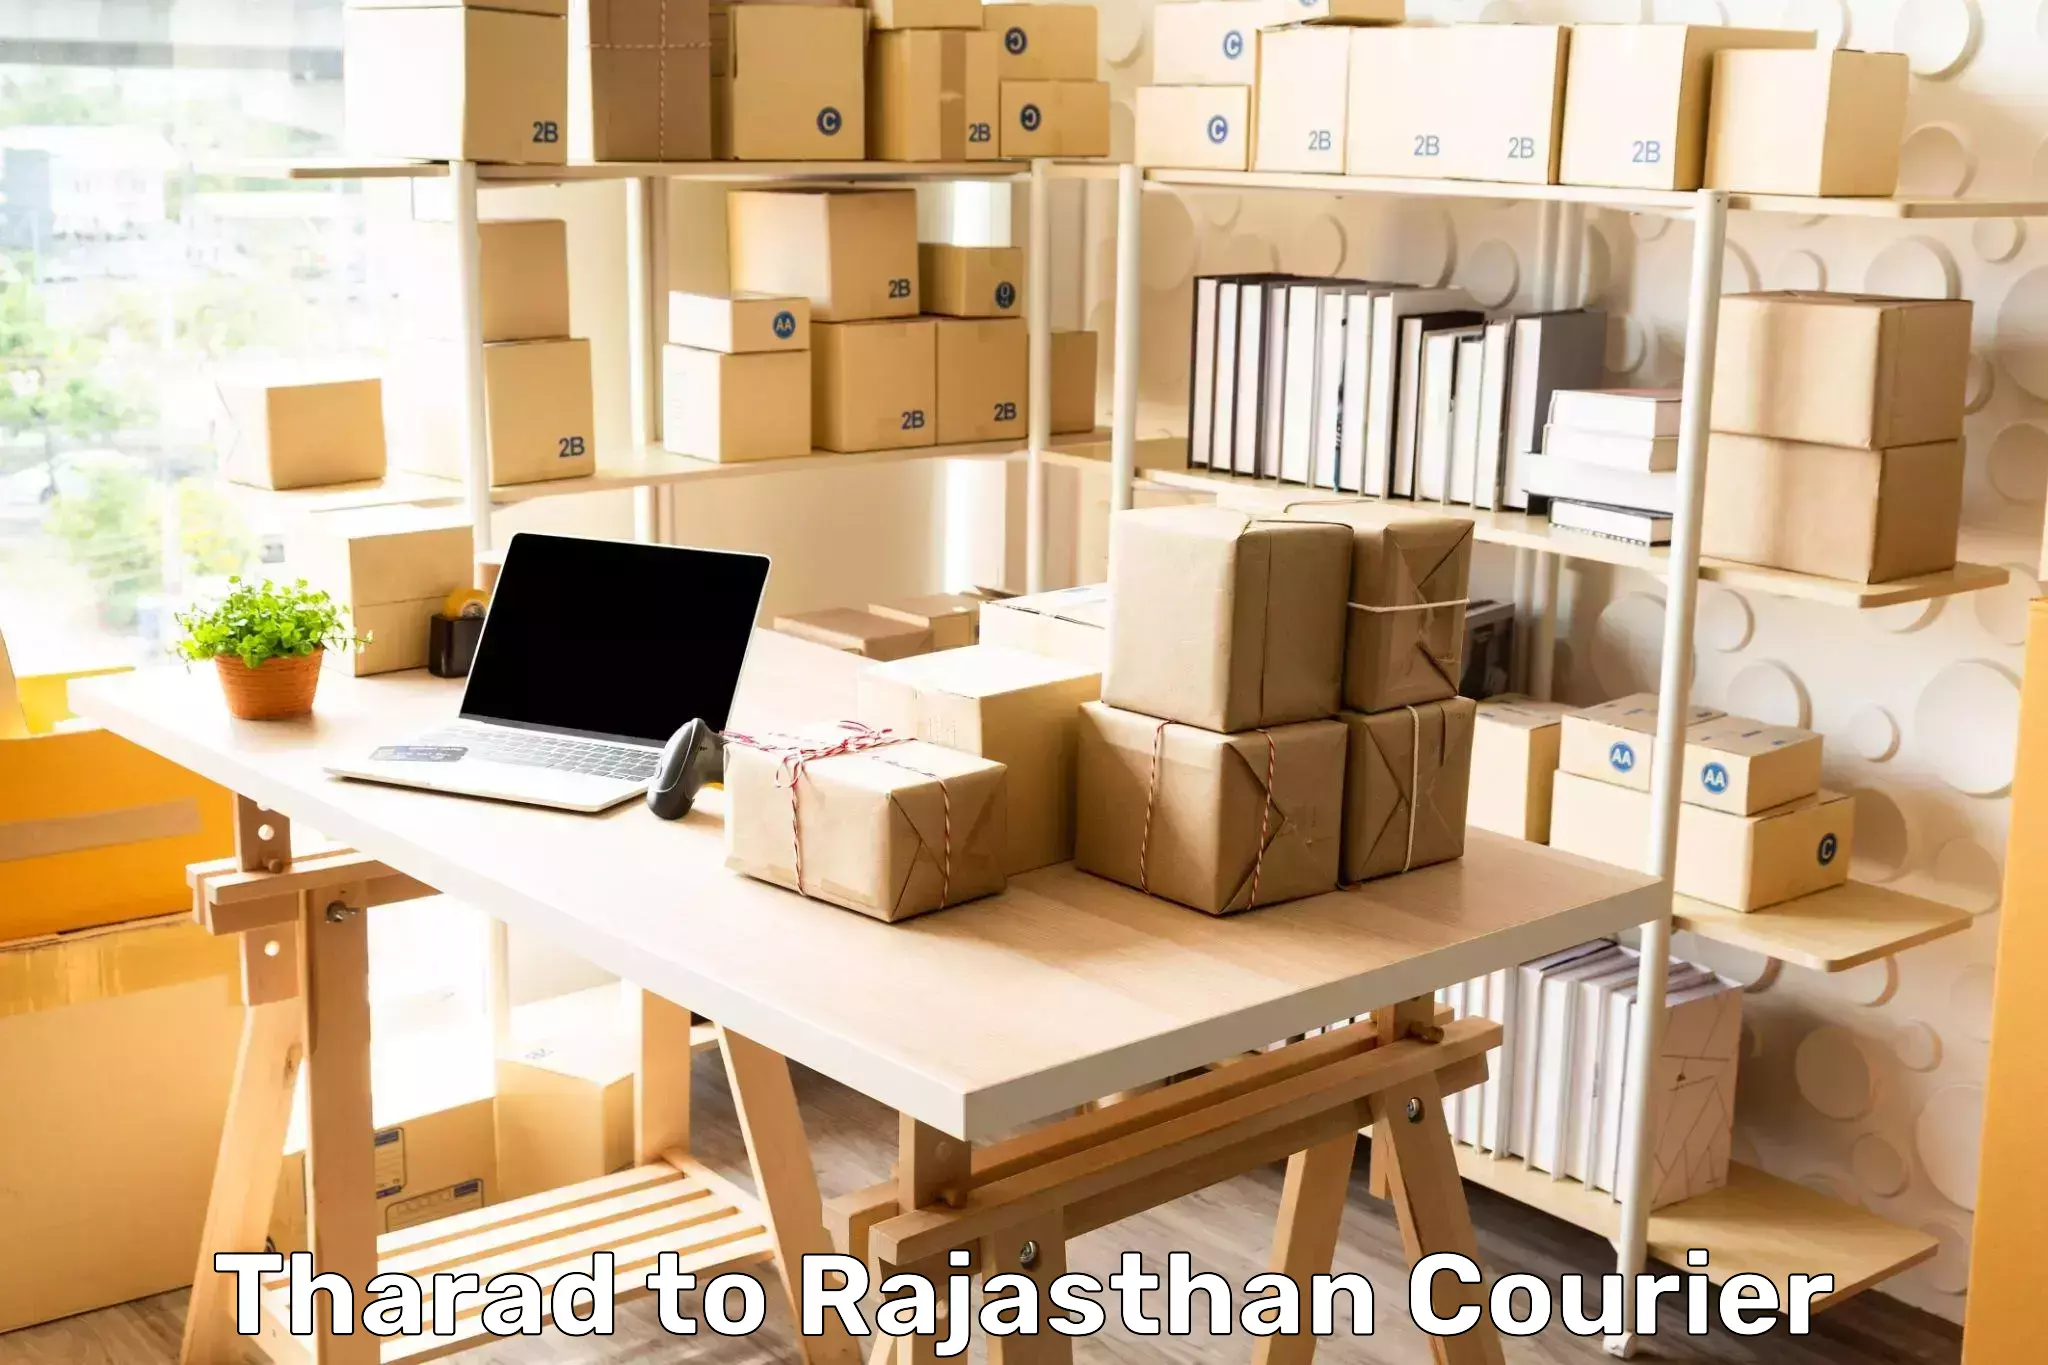 Nationwide shipping services Tharad to Rajasthan